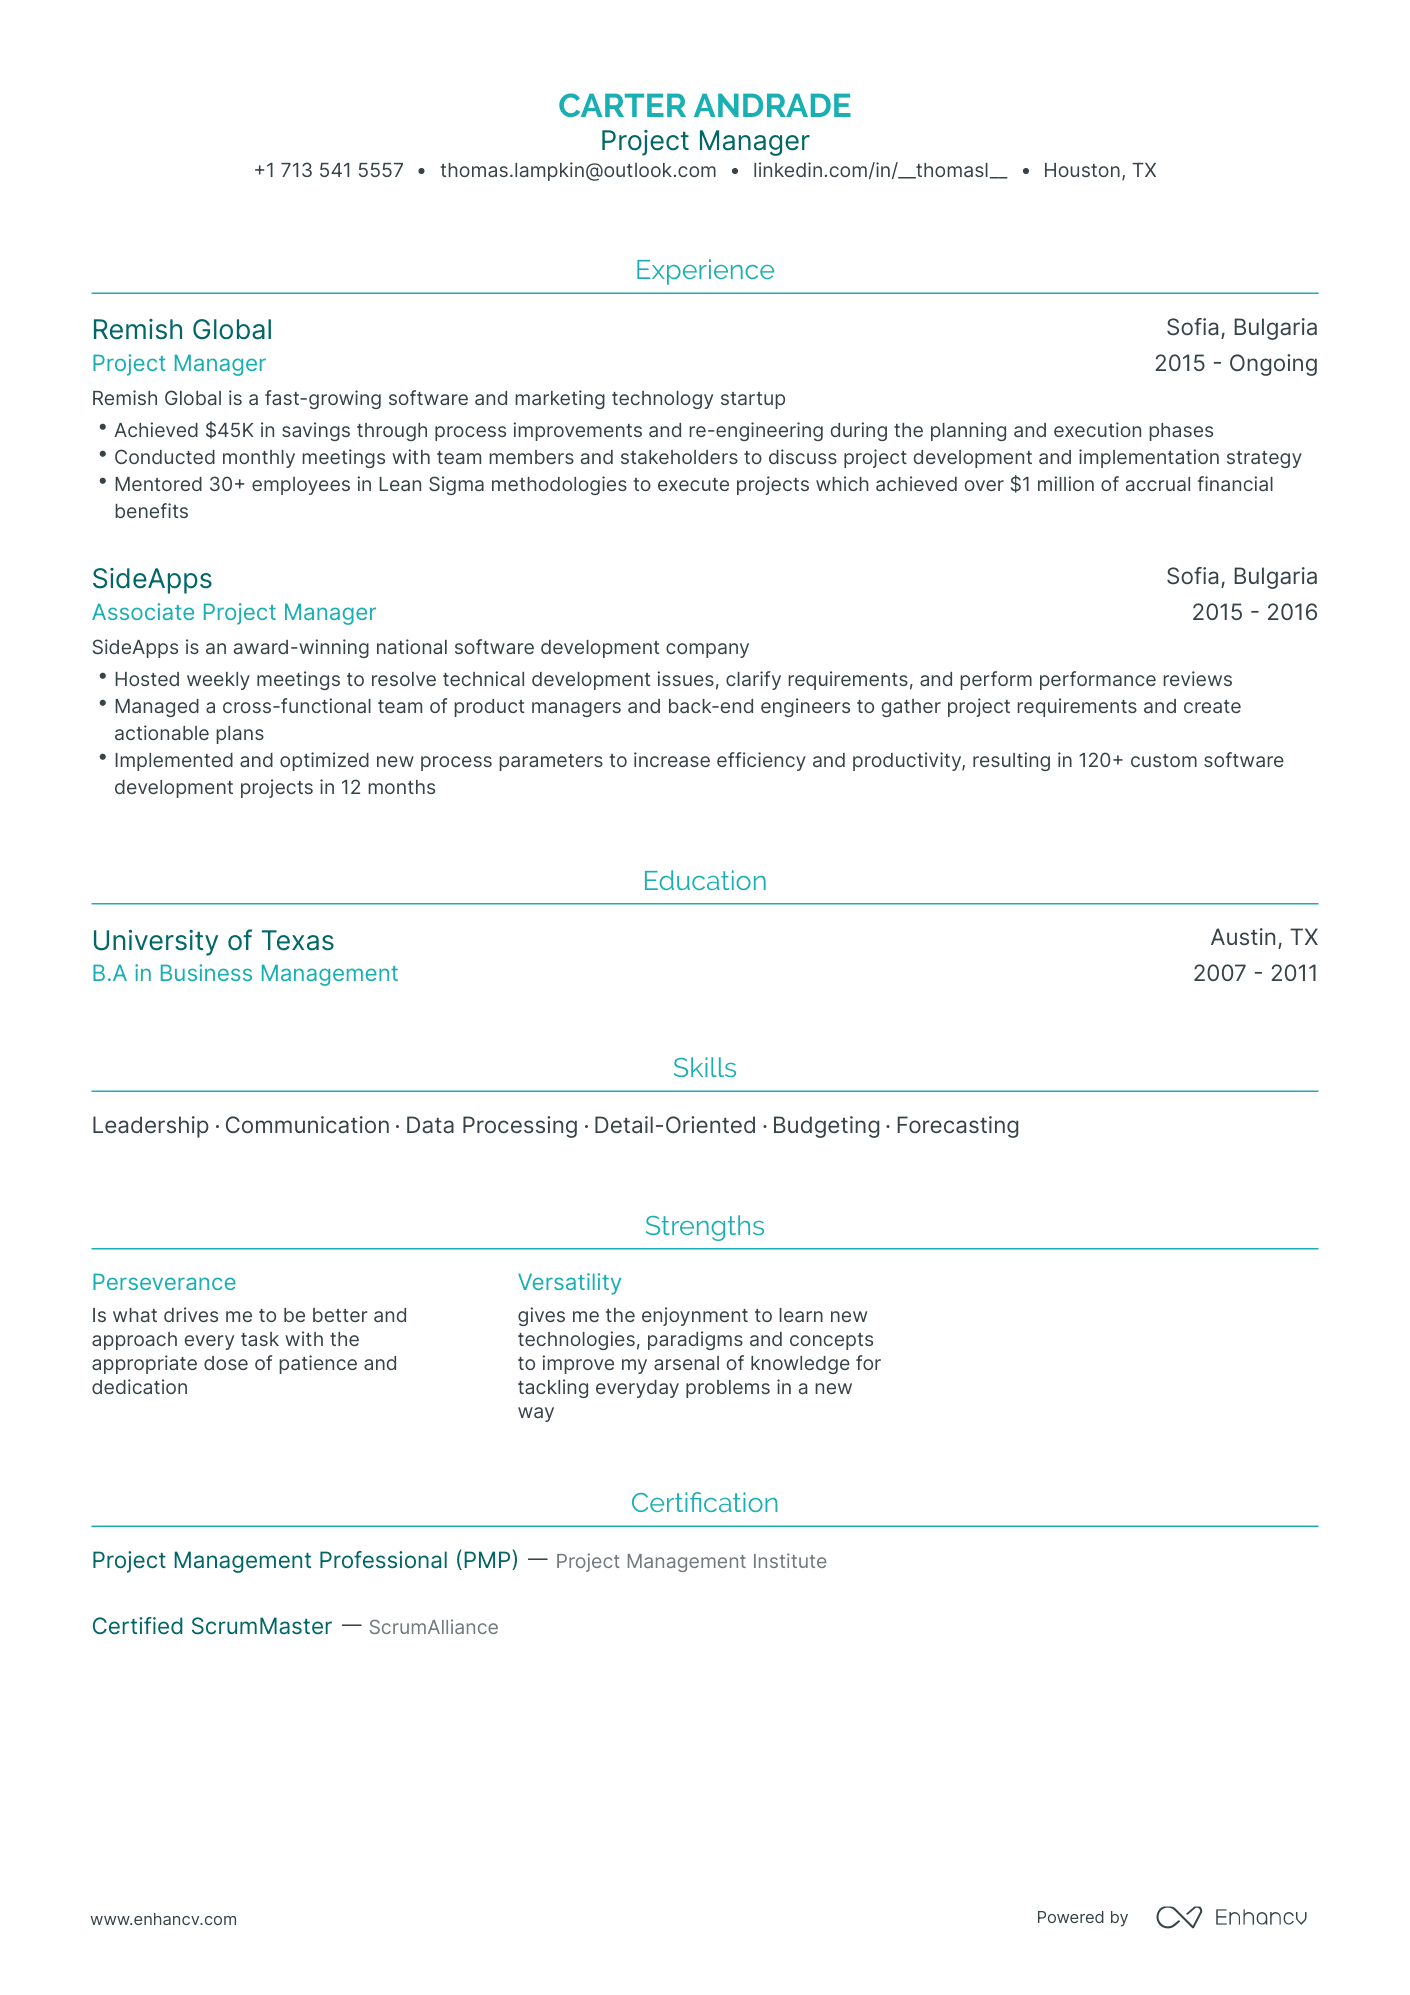 Traditional ATS Resume Template